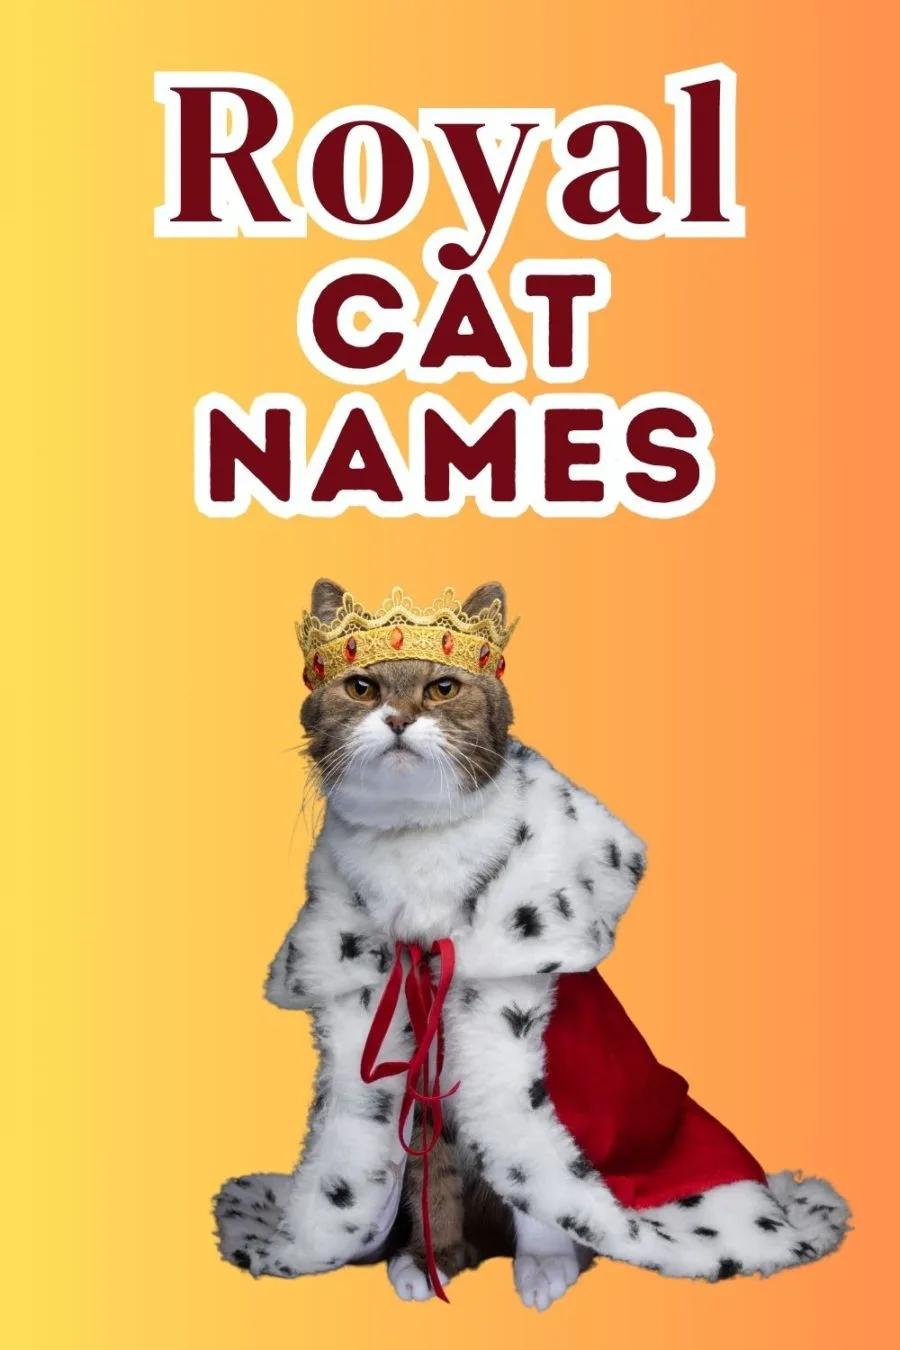 cat in crown and robe looking at camera in lower portion of image; in upper portion of image are words Royal Cat Names